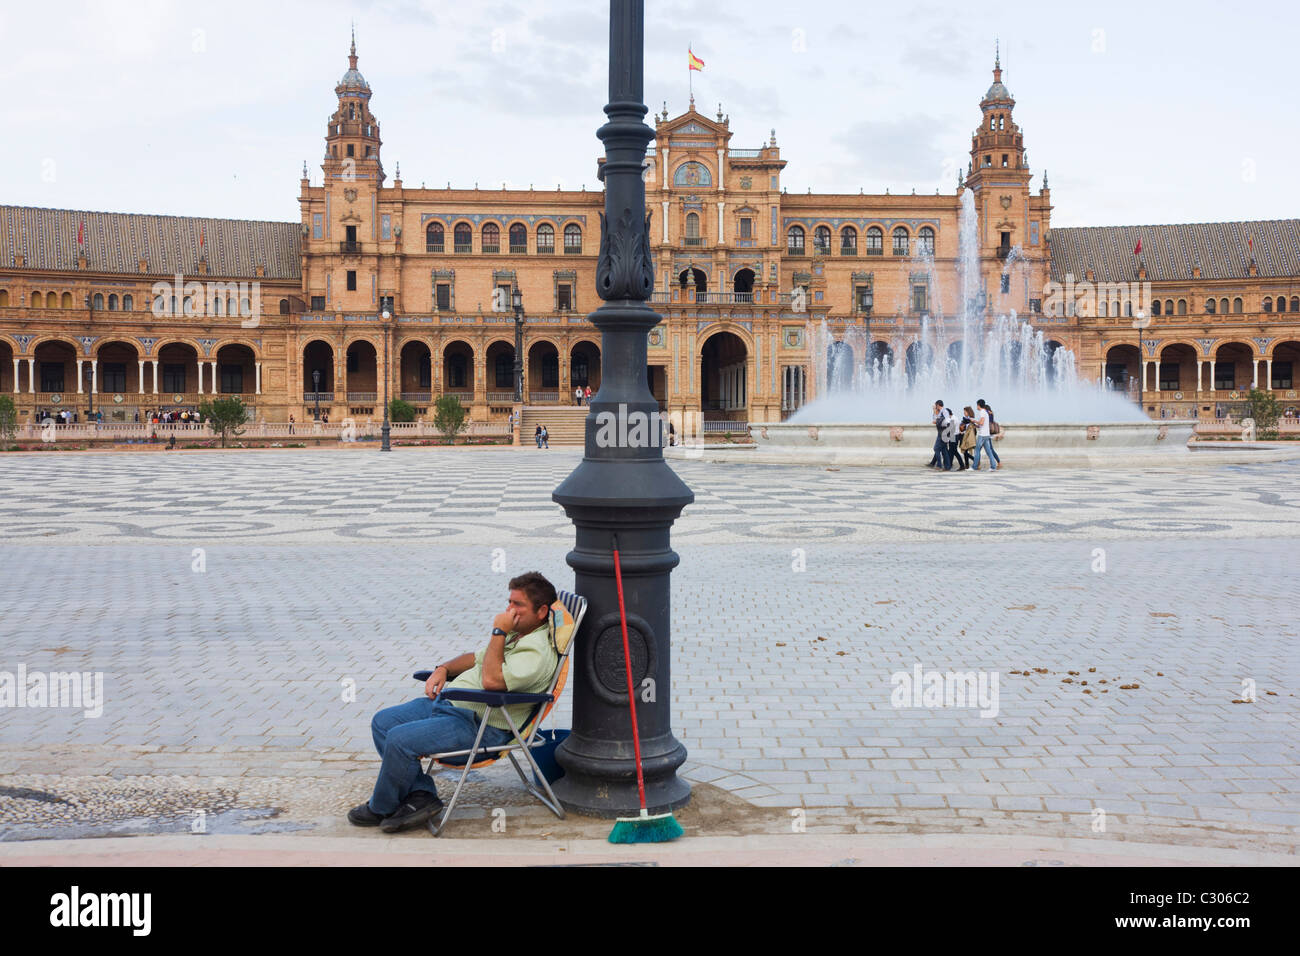 Doney ride owner awaits new business during quiet period in Seville's Plaza de Espana. Stock Photo